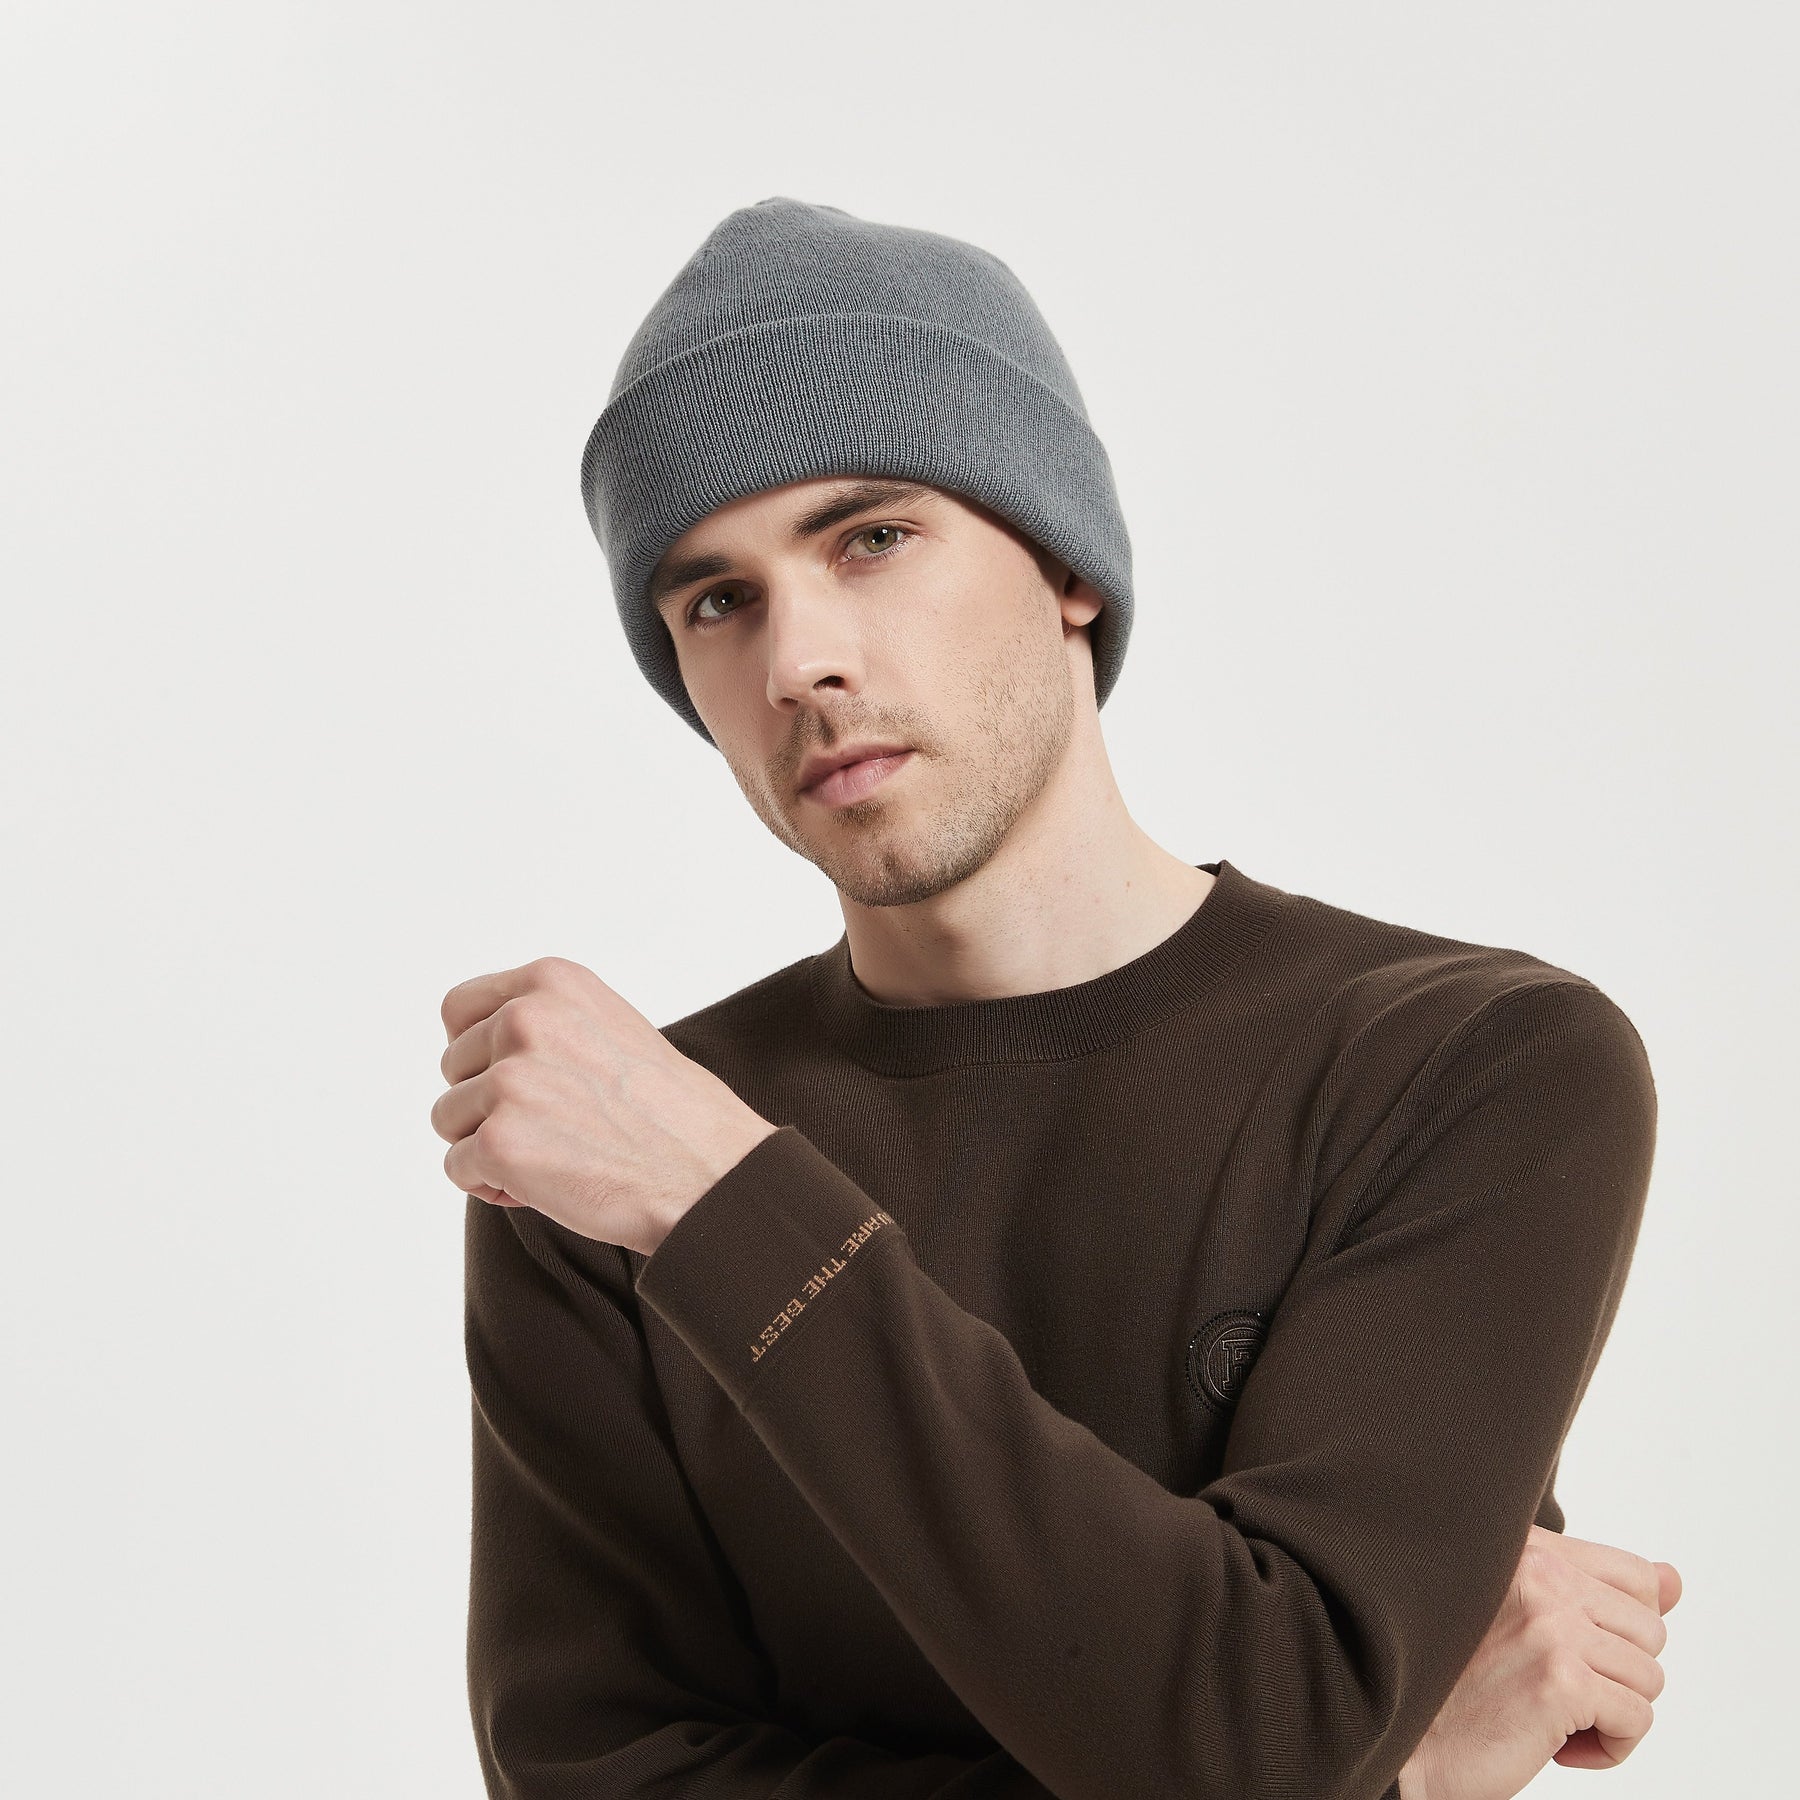 A male model wears a grey color radiatio proof beanie, front view